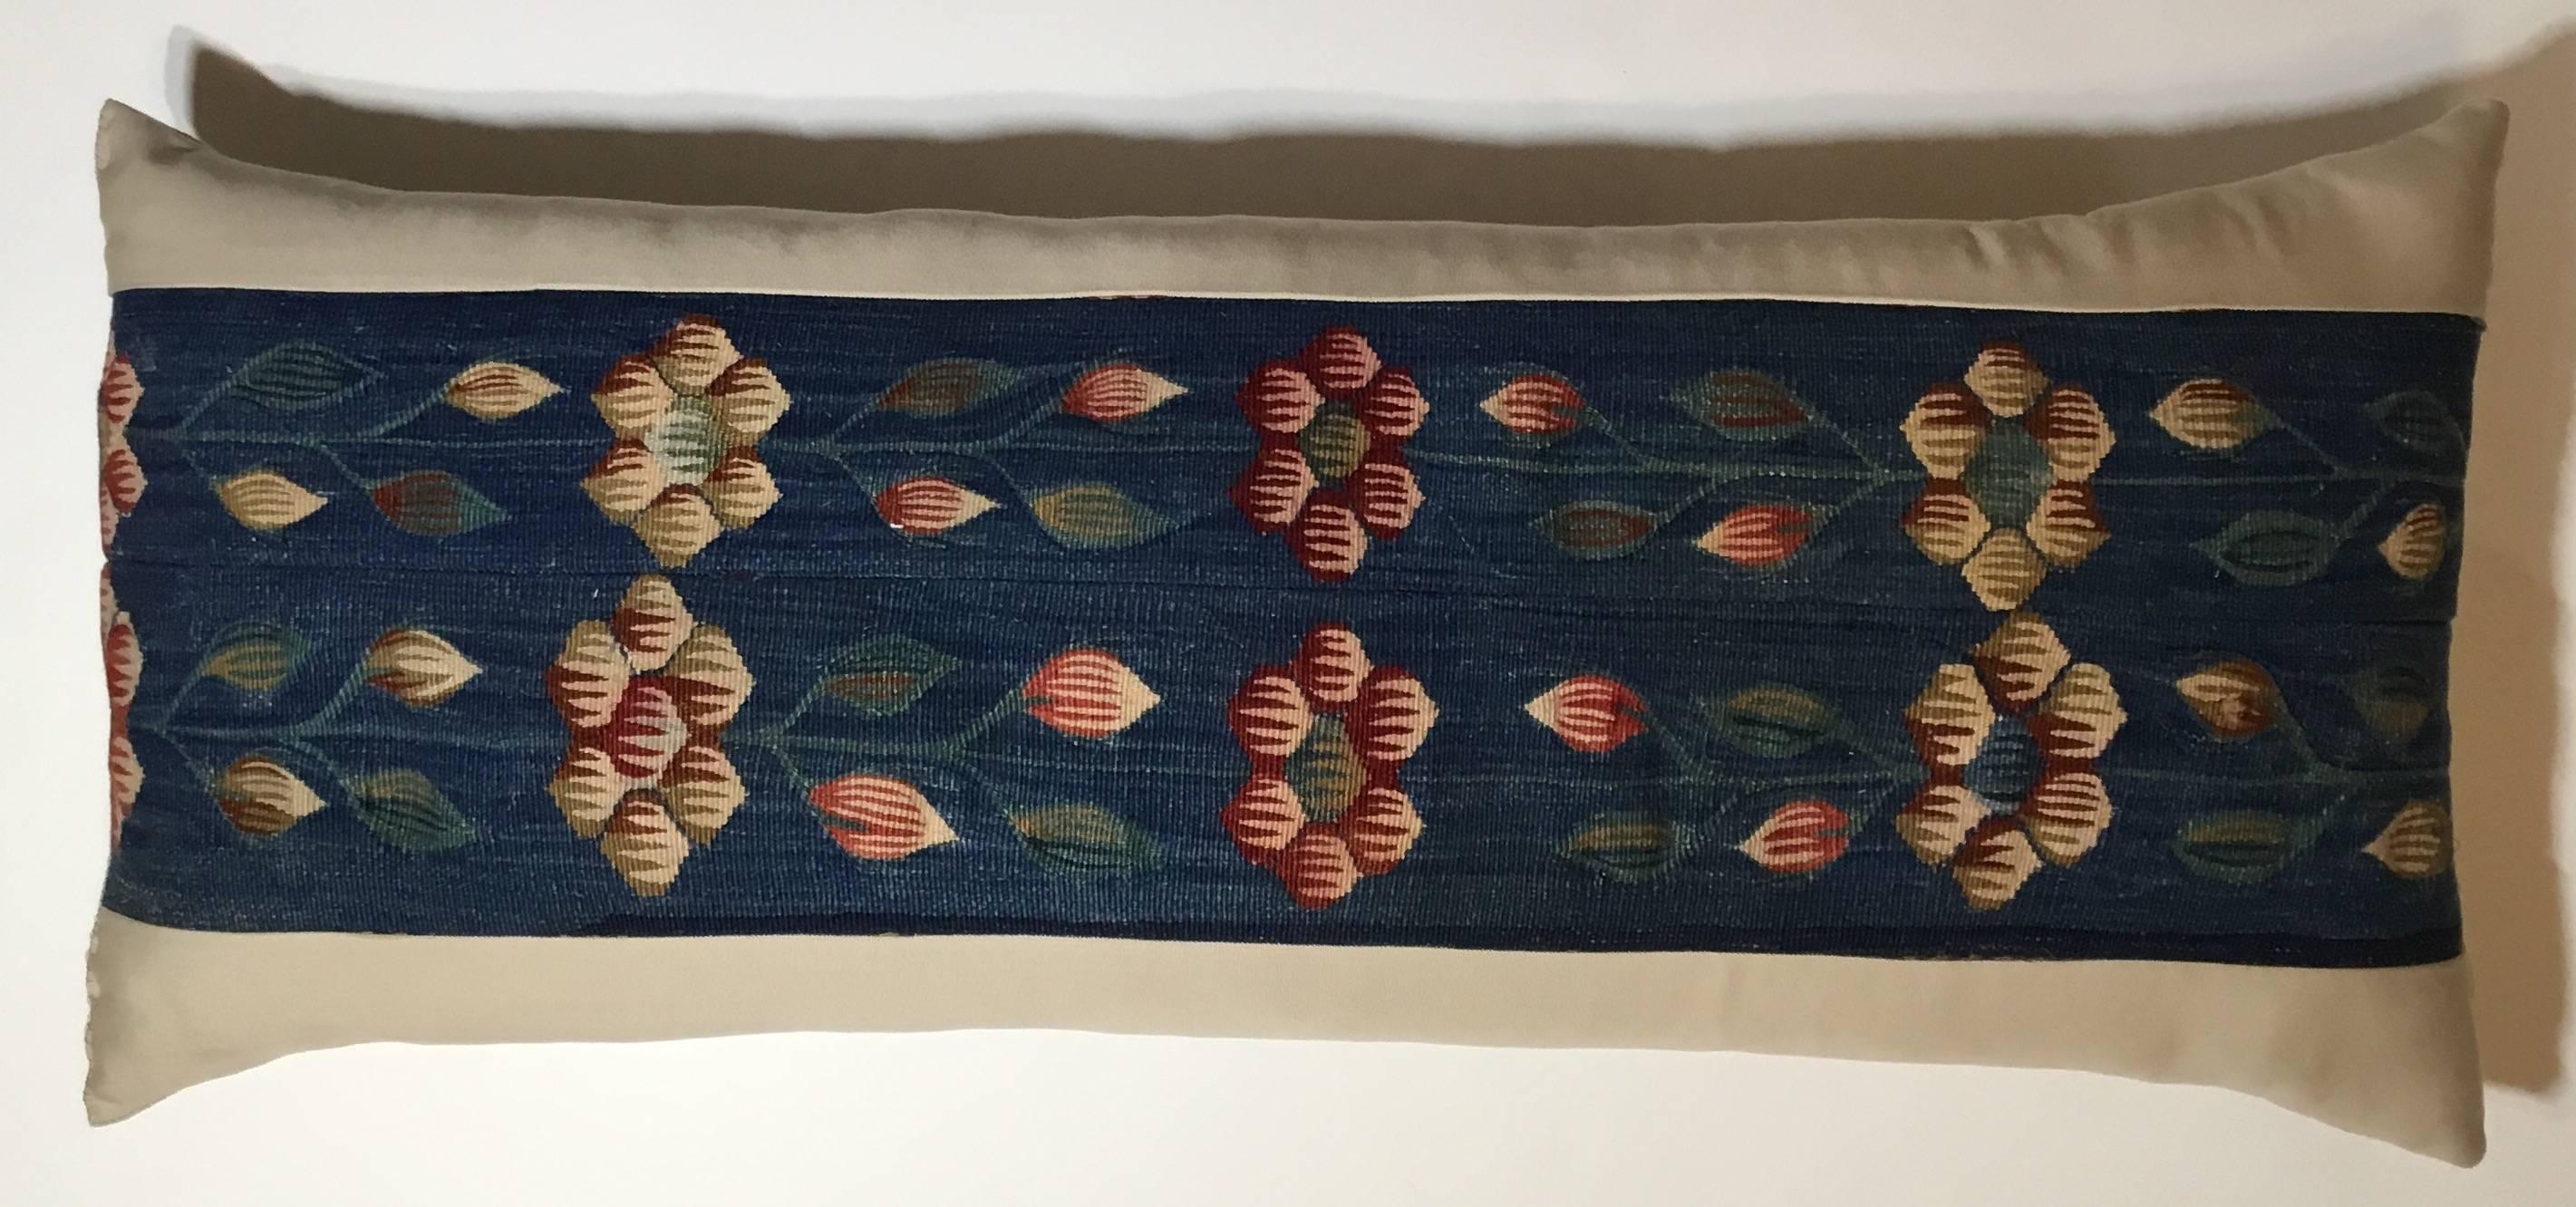 Beautiful pillow made of hand woven flat-weave Kilim rug probably from Europe. Artfully hand embroidery of flowers and grain on a indigo-blue hand woven background. Quality insert ,linen backing.